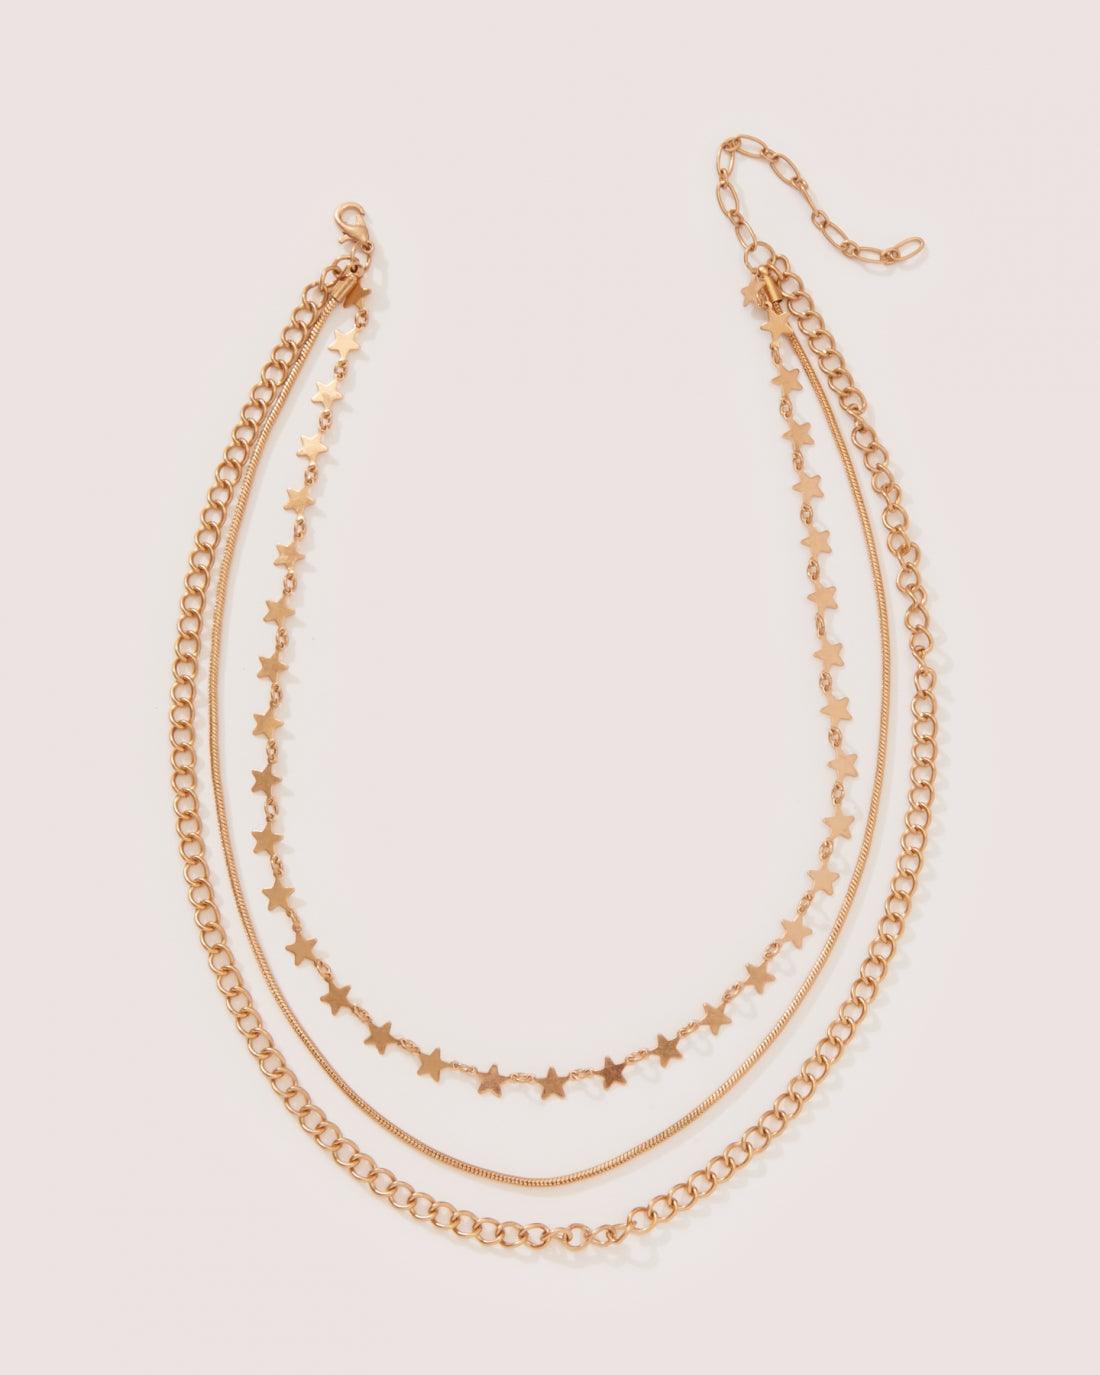 Tri pre-layered necklace. Chain with star pendant, France chain and cable chain. Necklace measurements Star chain, 15.4 inches, Franco chain 15 inches, and cable chain 18 inches.